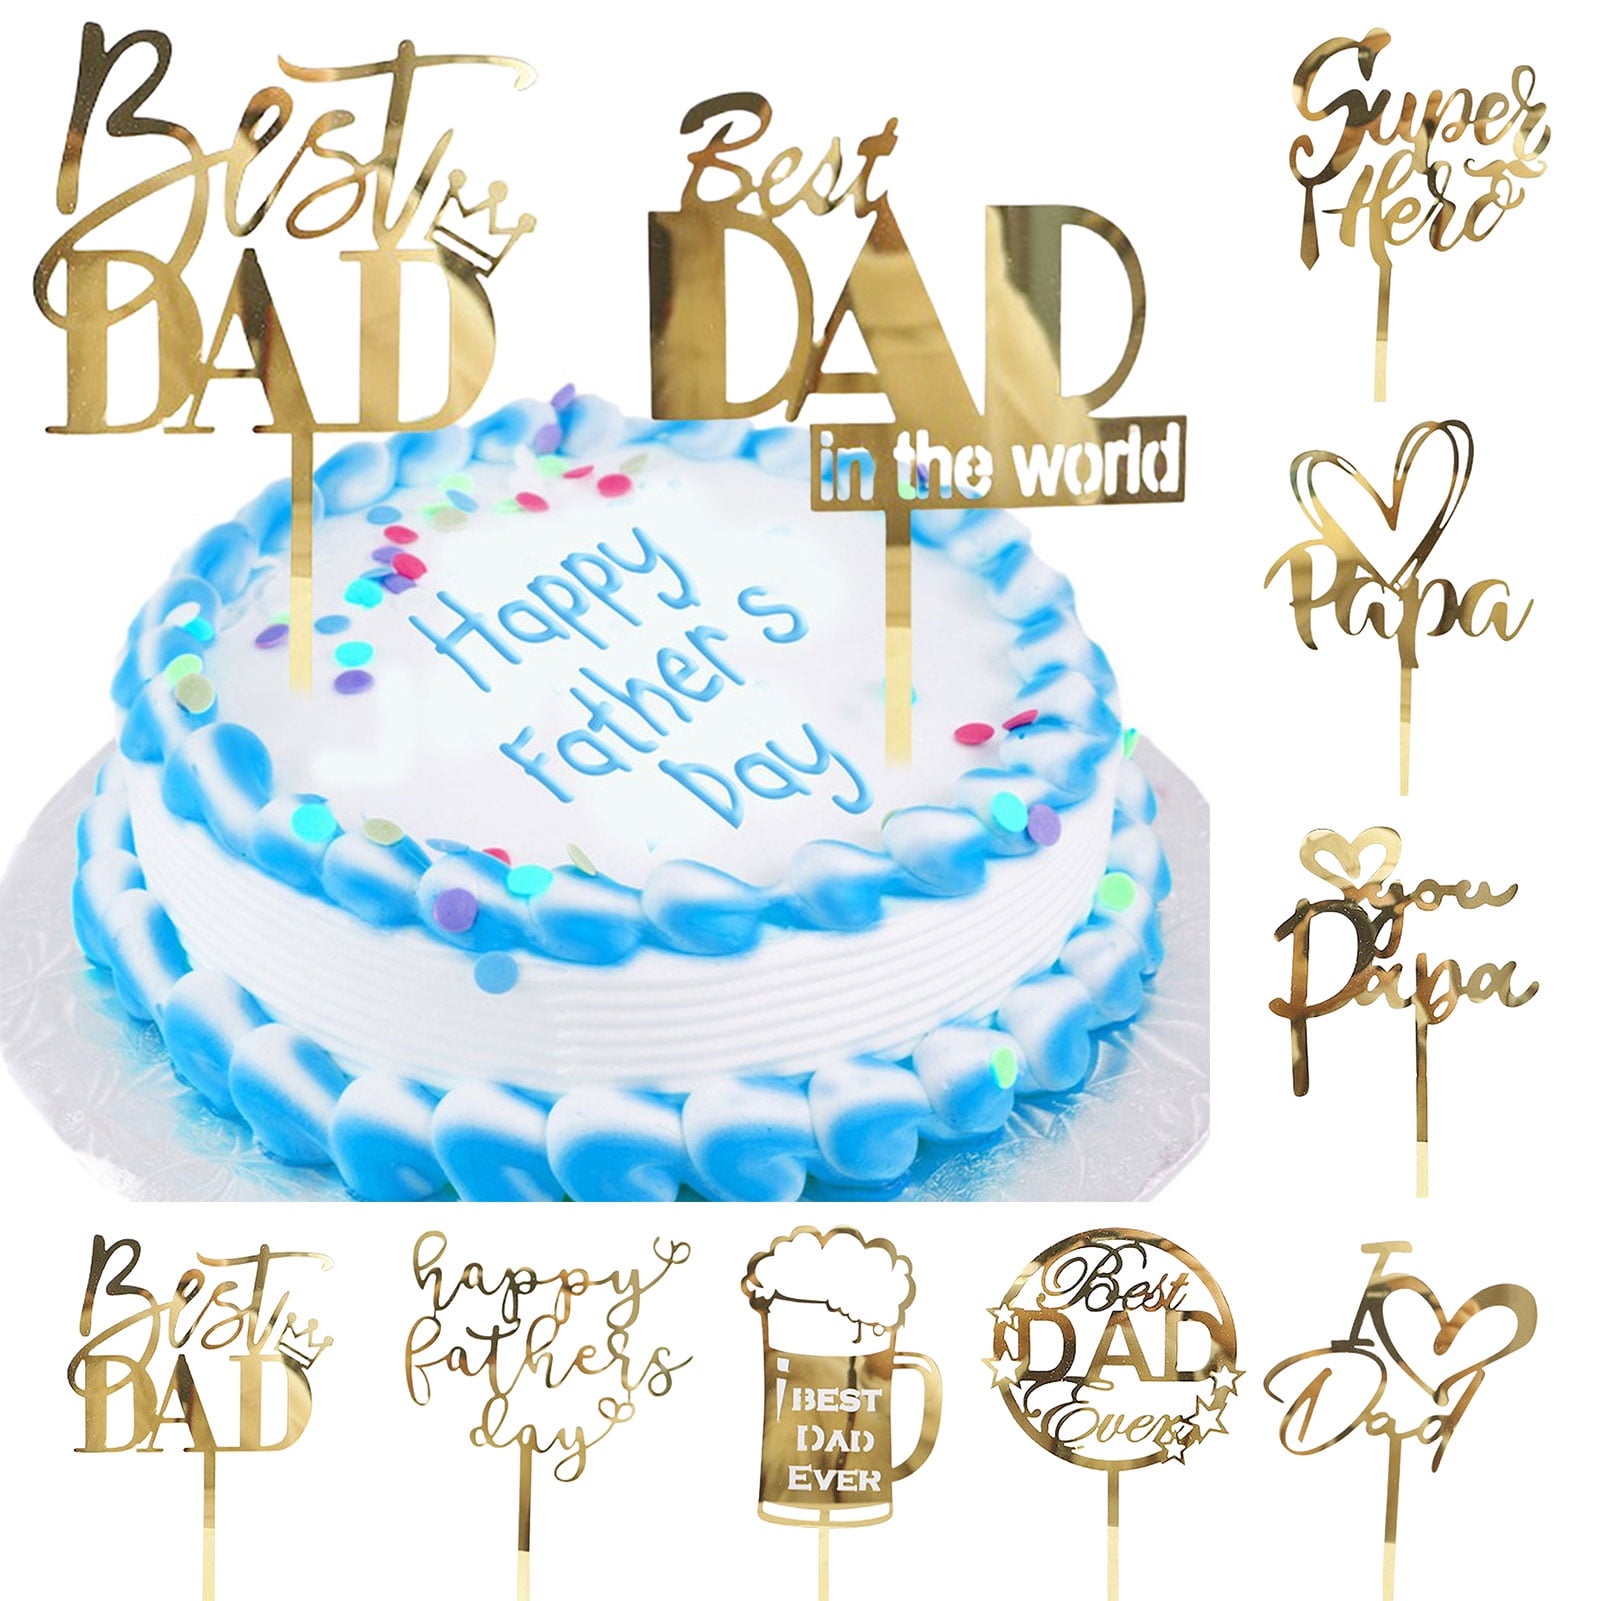 Thunders Father's Day Cake - A Perfect fgift for Dad!-sgquangbinhtourist.com.vn